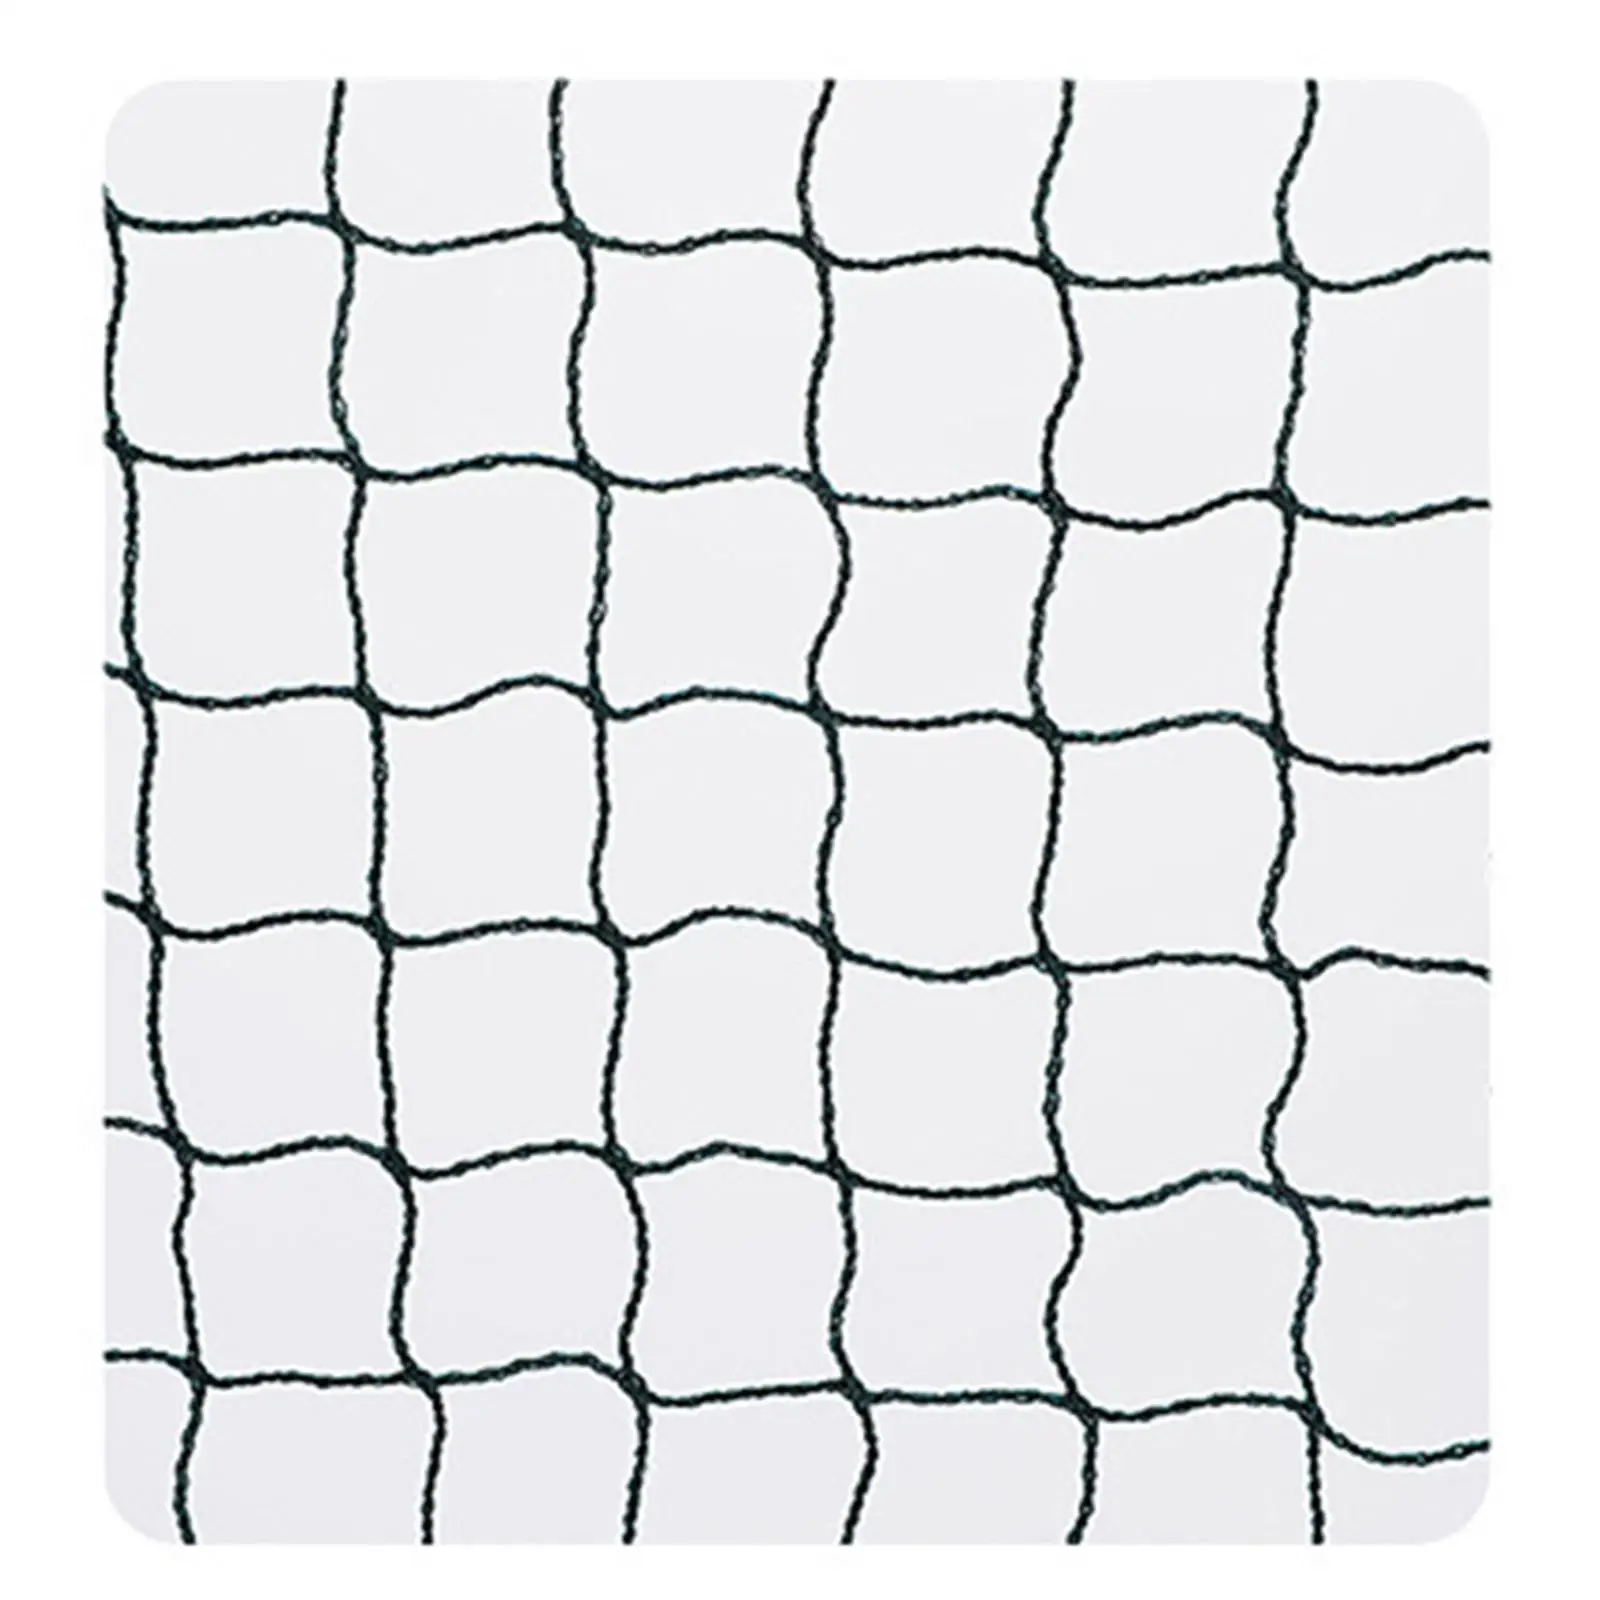 Portable Badminton Net Braided Mesh Easy Assemble Replace Net for Volleyball